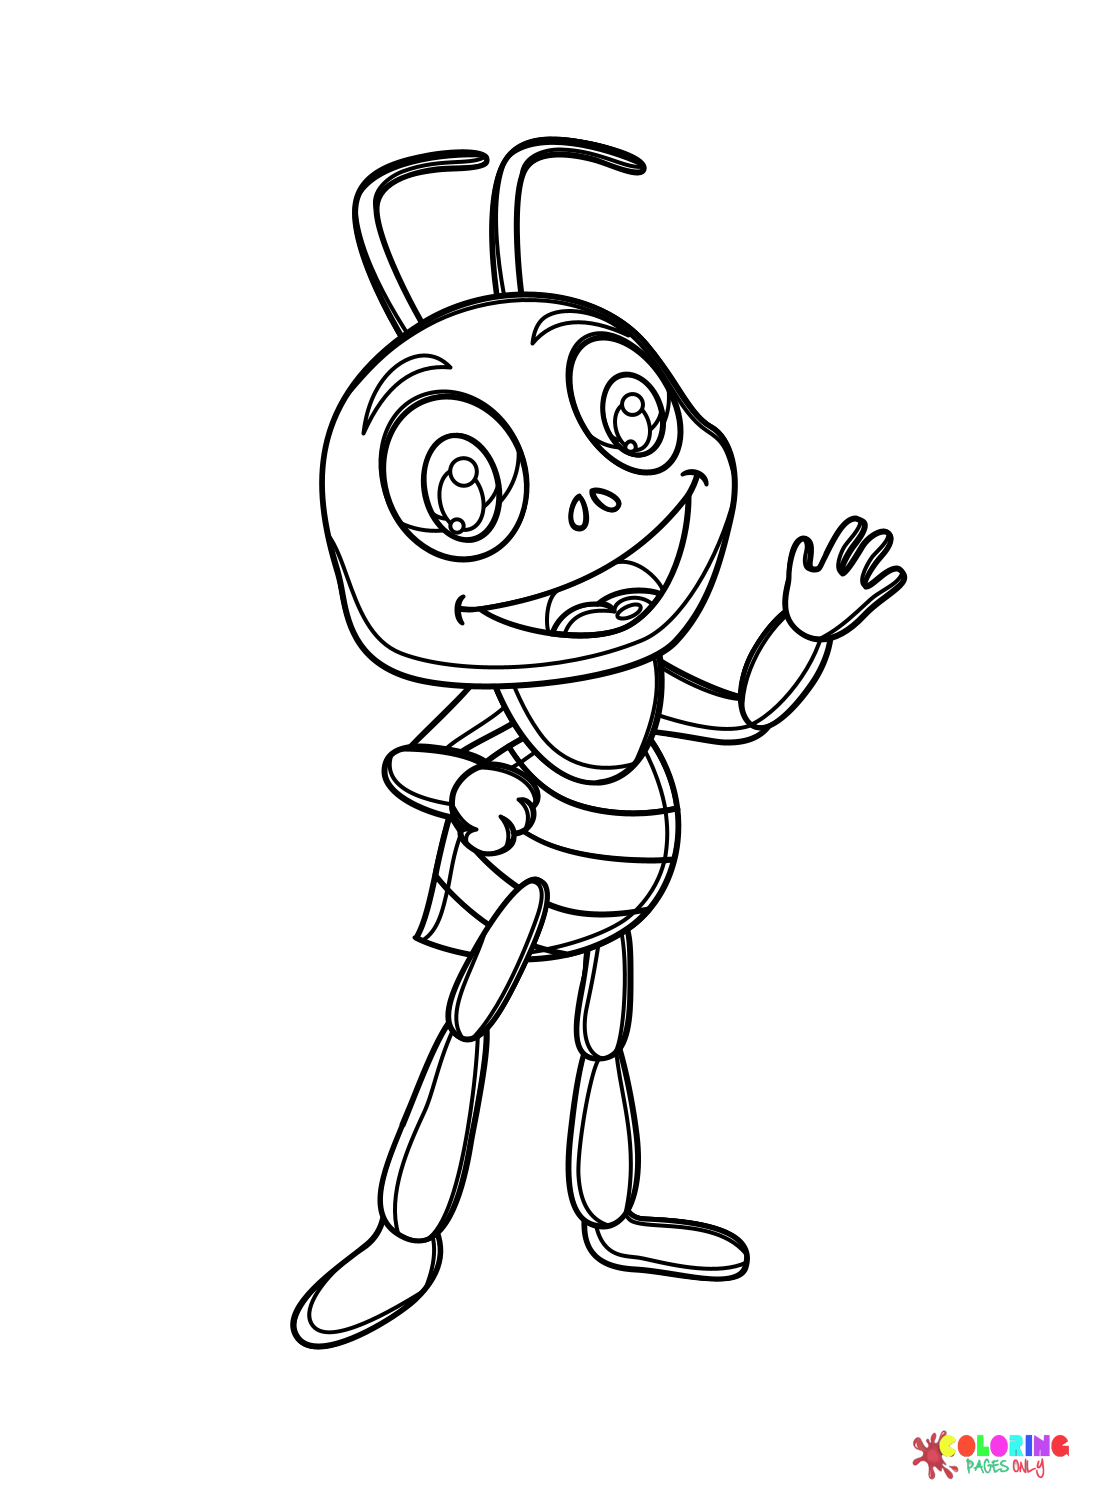 Ant to Print Coloring Page